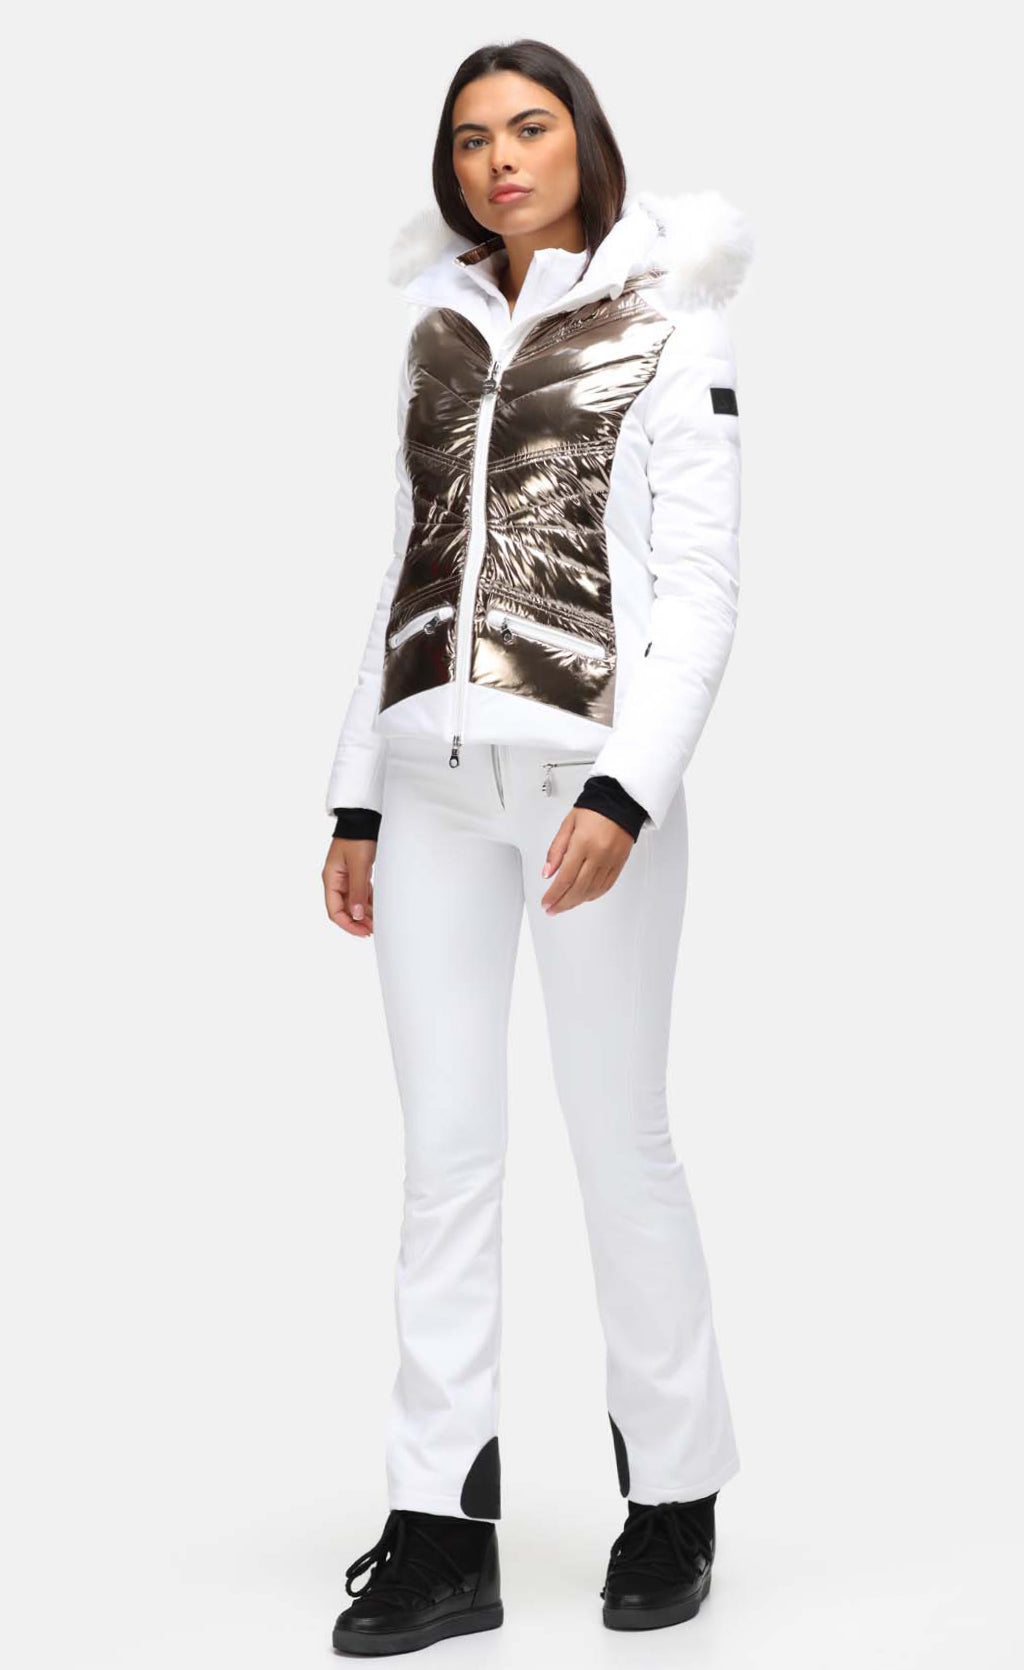 High Society Lani Softshell Ski Pant in White with Bronze